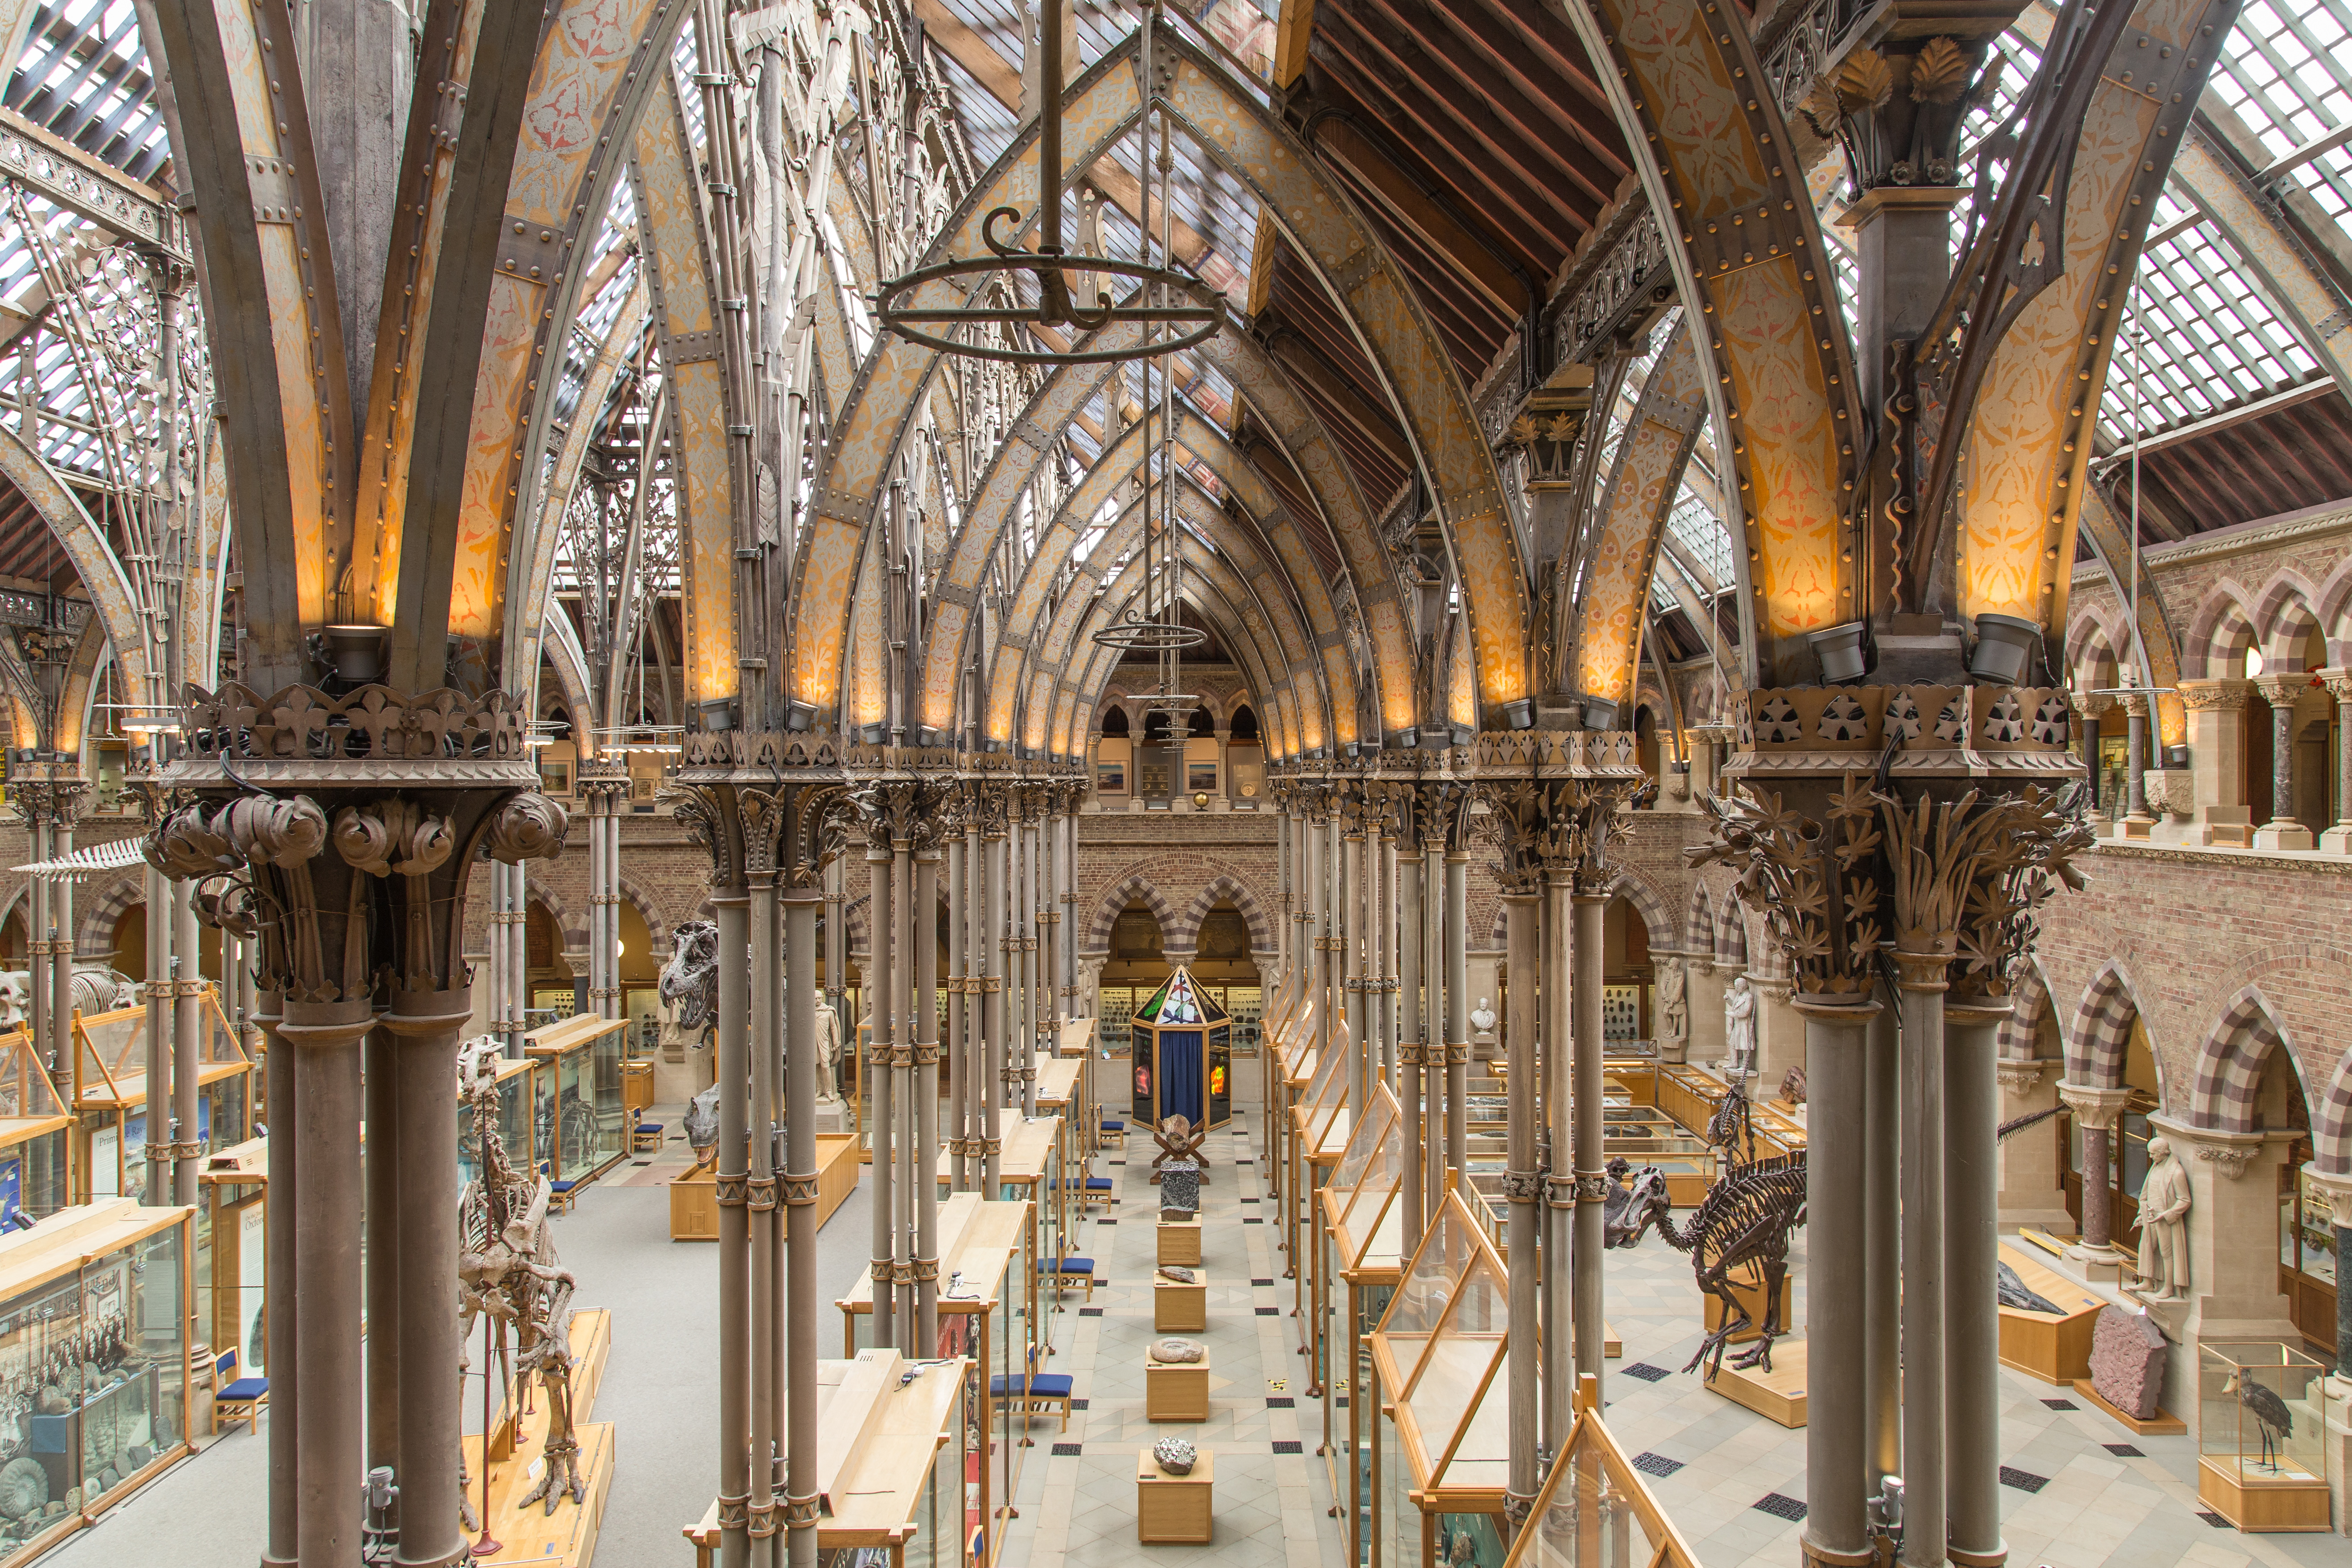 A view of the Oxford University of Natural History Museum through its large neo-gothic columns